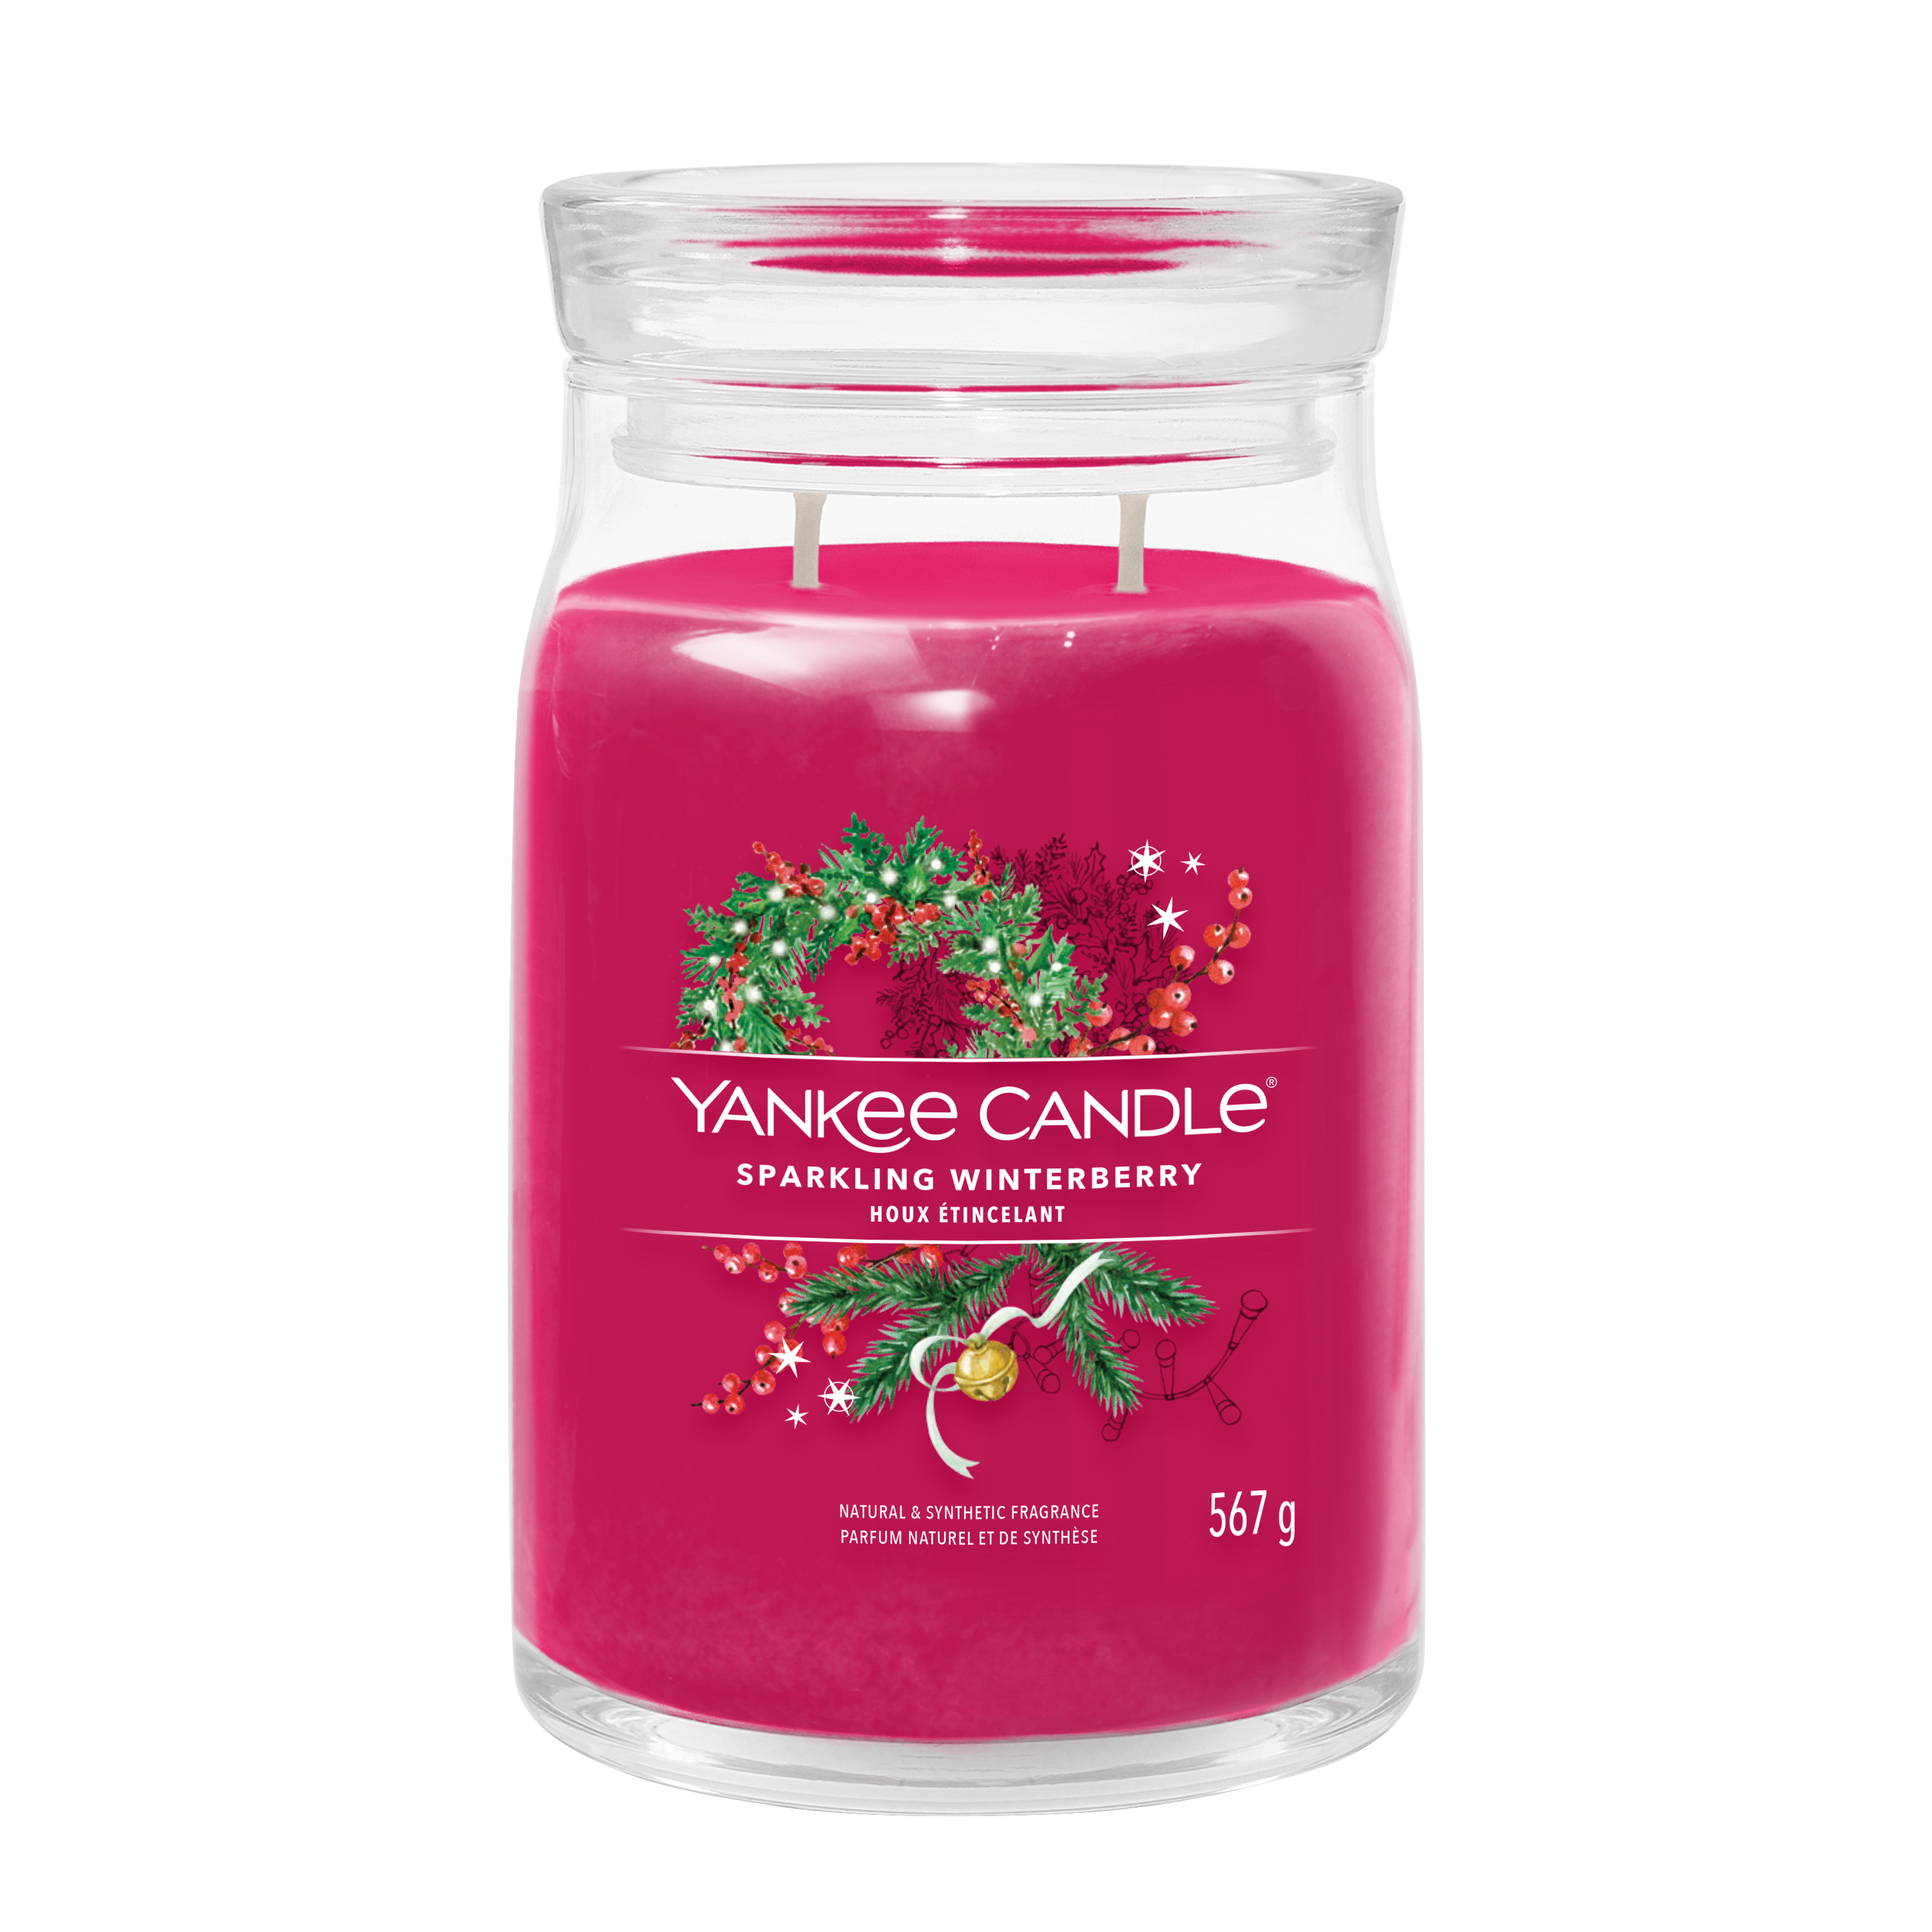 Yankee Candle Sparkling Winterberry 567g